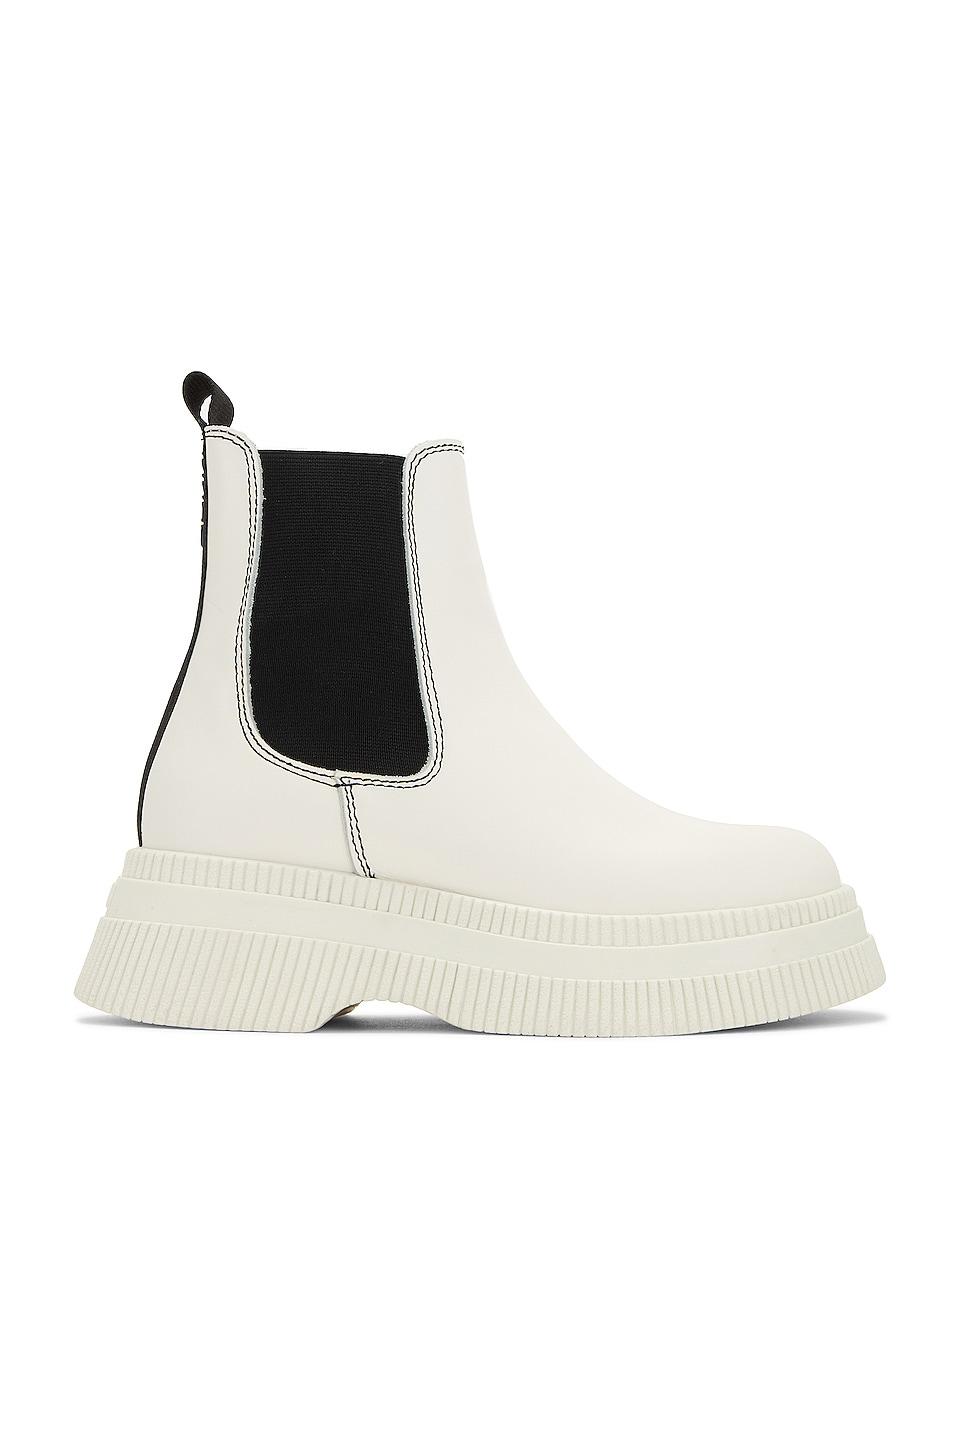 Ganni Creepers Chelsea Boot Tonal in White | Lyst